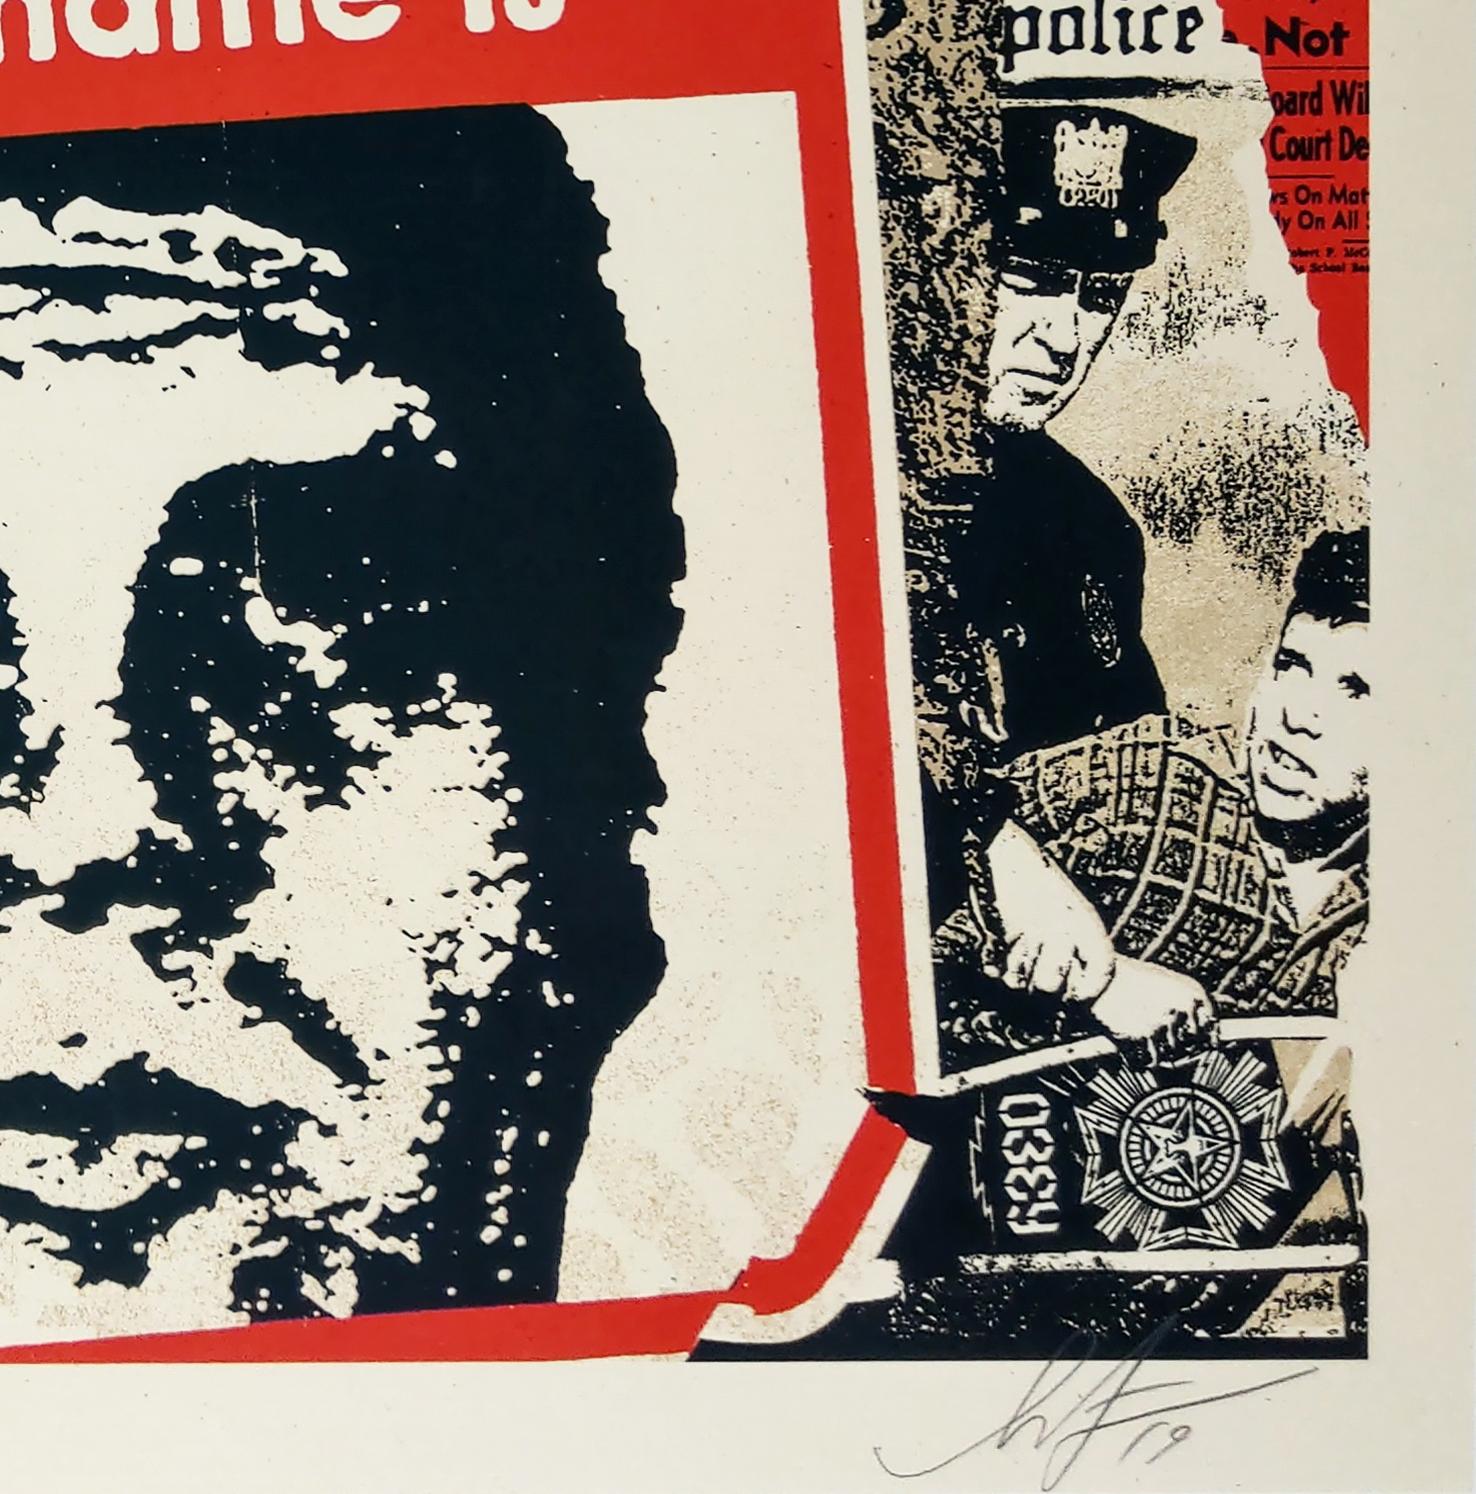 Hello My Name Is. 18 x 24 inches. Screenprint on cream Speckletone Paper. 18 x 24 inches. Signed by Shepard Fairey. Numbered edition of 550.
 
From the Artist - 